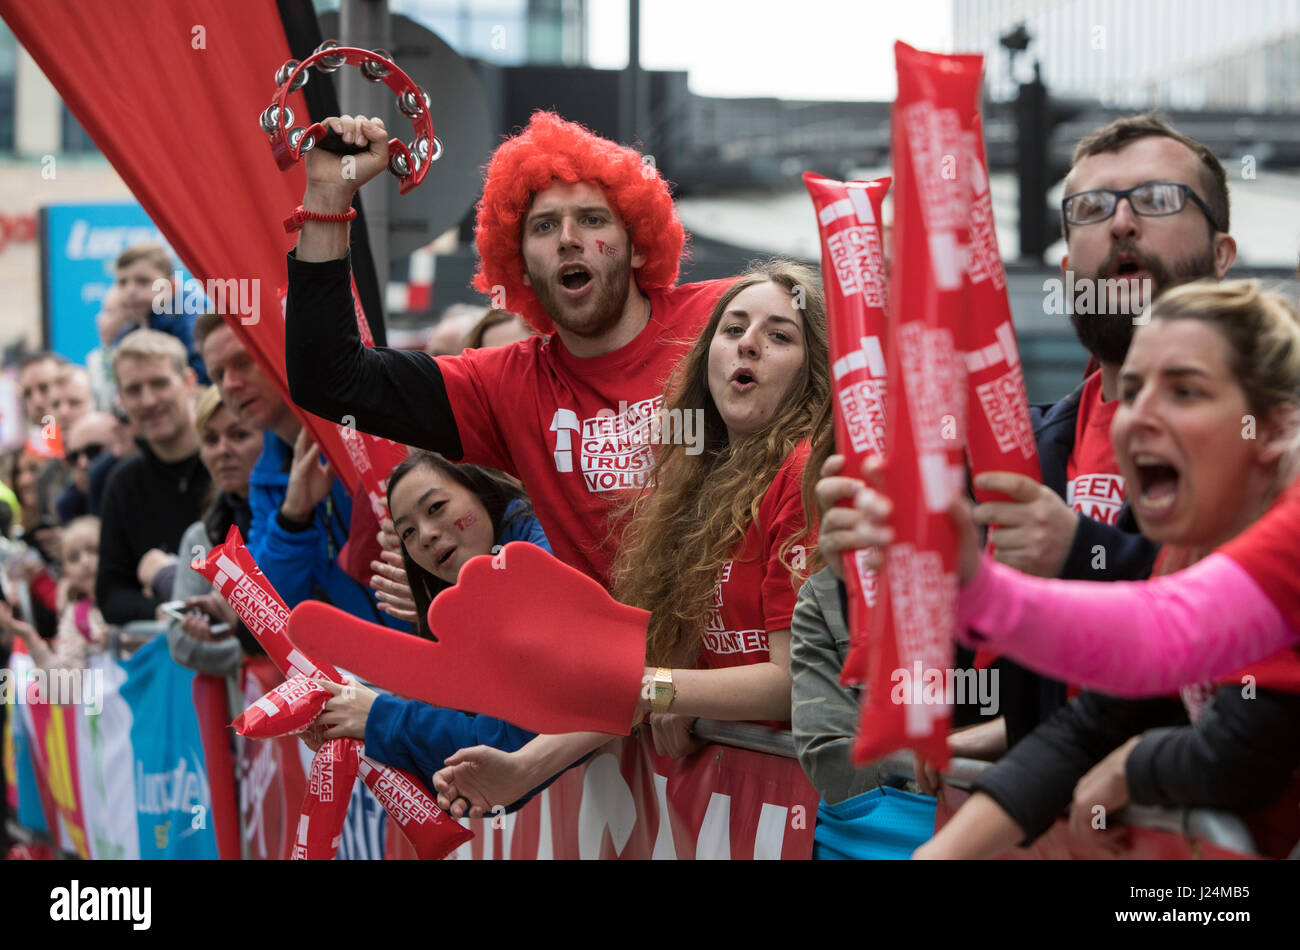 LONDON - April 23: Virgin Money London Marathon. Charity supporters show their excitement as runners pass through Canary Wharf. Photo: © 2017 David Levenson/ Alamy Stock Photo